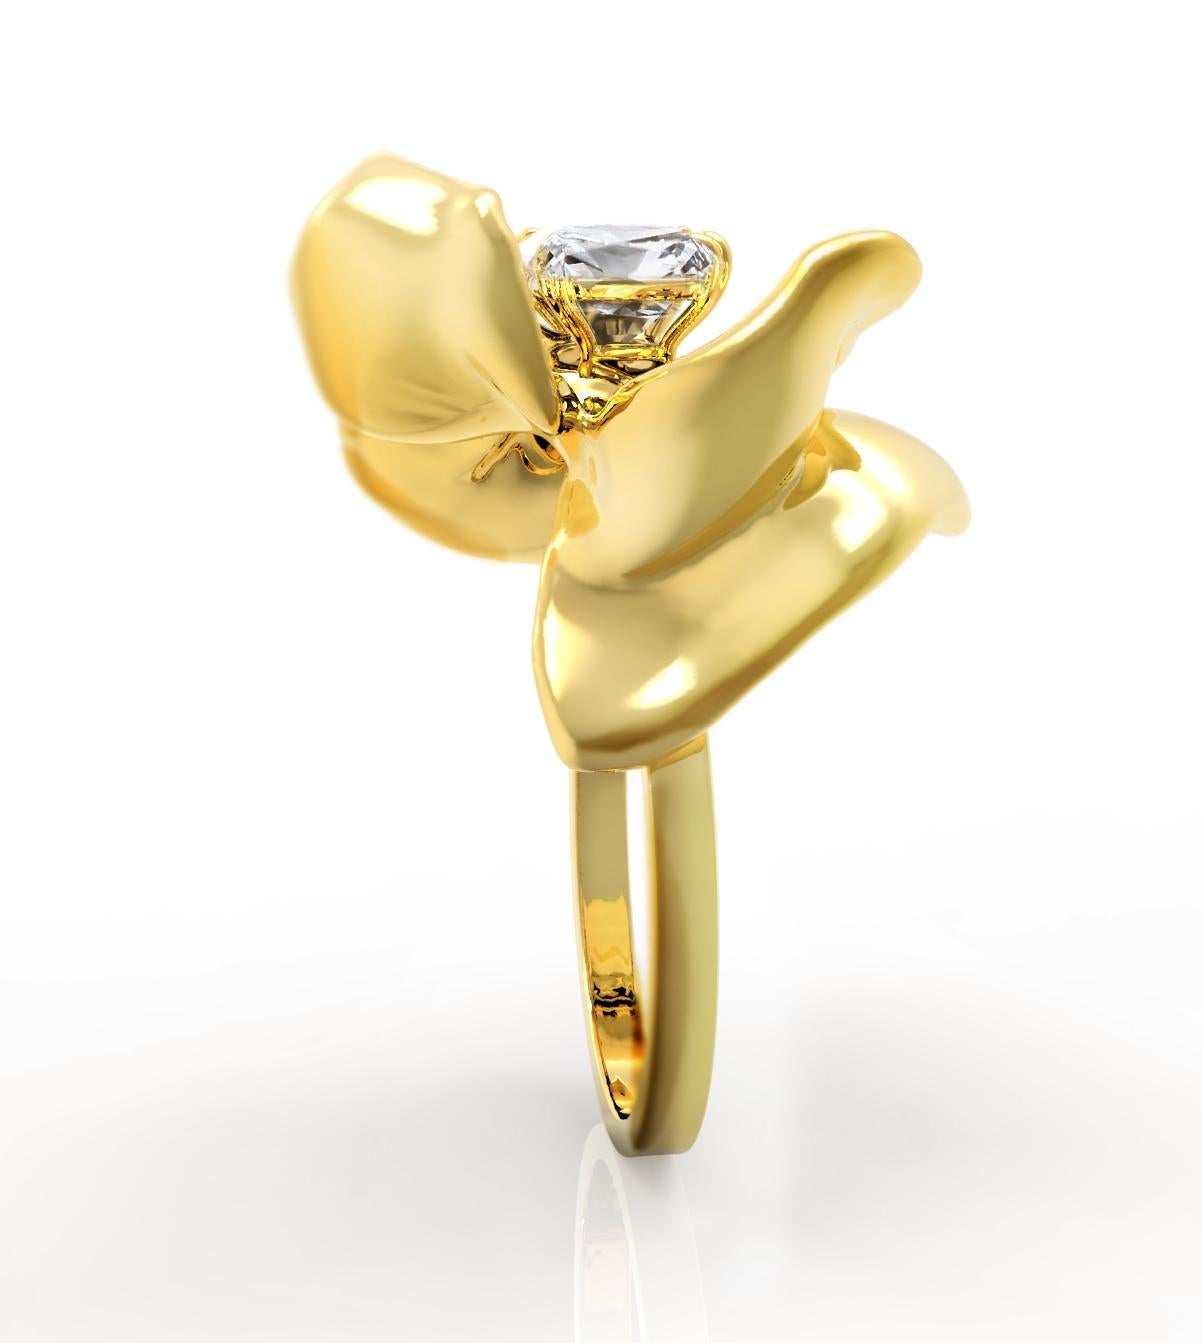 This Magnolia Flower engagement or wedding ring is in 18 karat yellow gold with a crushed ice cushion diamond. The ring is designed by oil painter and 3D jewellery designer Polya Medvedeva, and it took 60 different designs to create this shape to